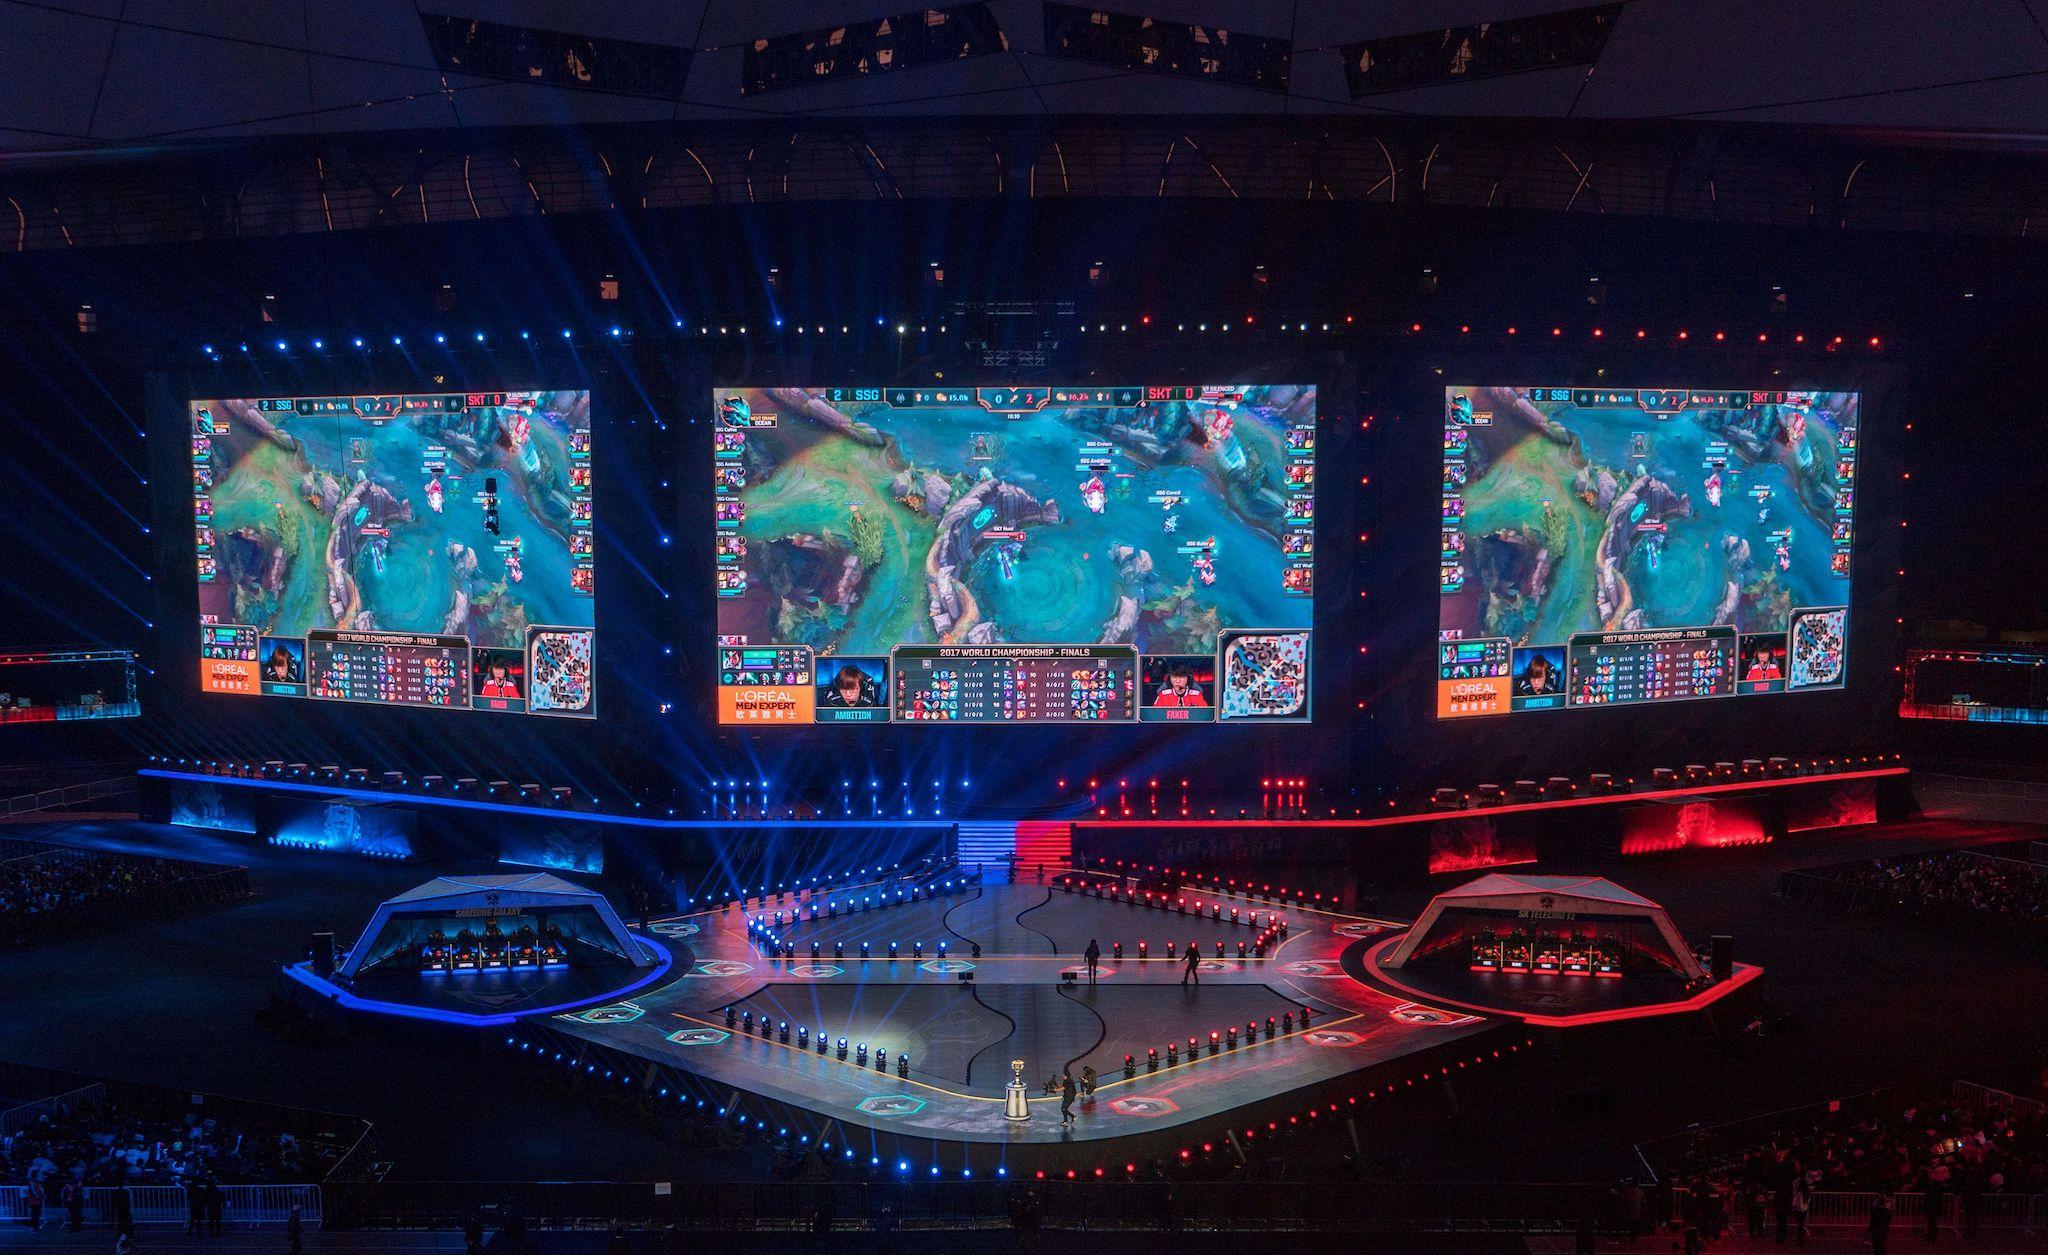 Game screen of League of Legends is seen on screens during the World Championships Final of League of Legends at the National Stadium 'Bird's Nest' in Beijing on November 4, 2017